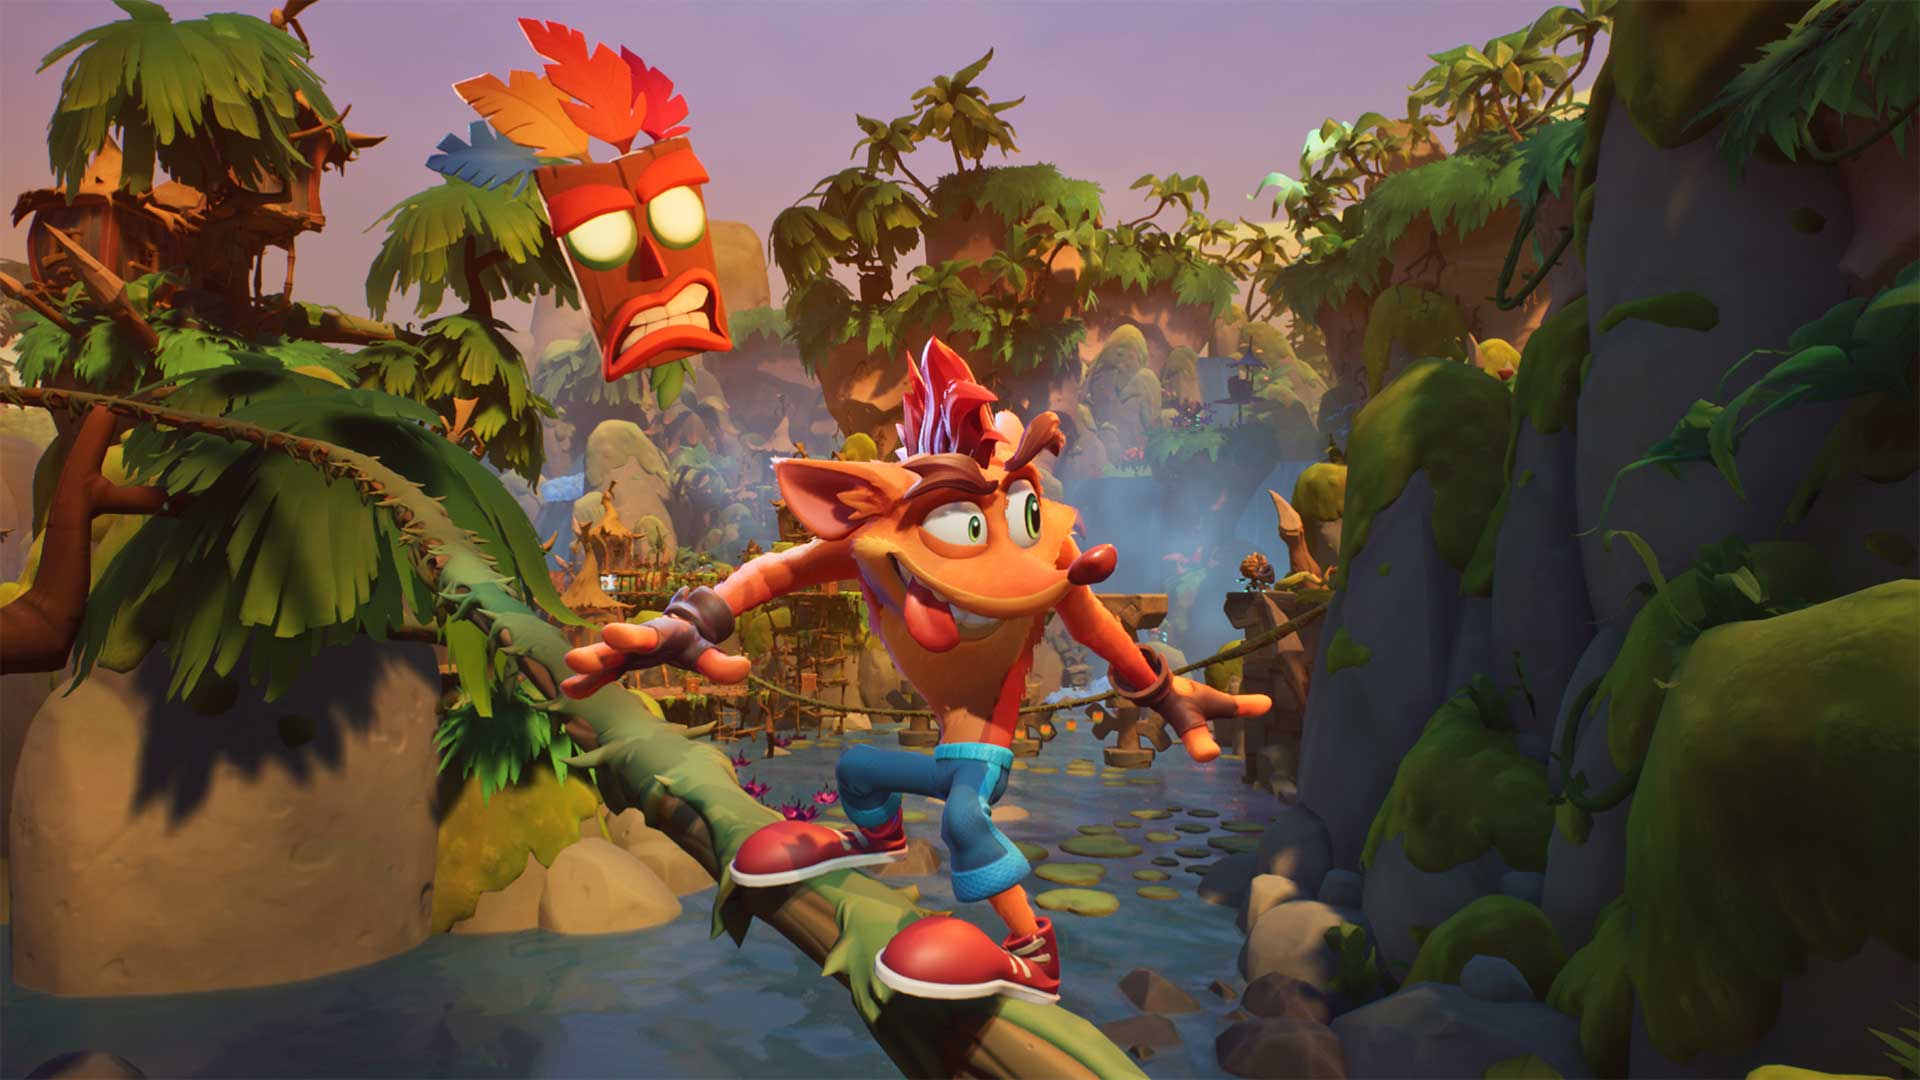 Crash Bandicoot 4 Will Have Over 100 Levels and In-Game Purchases